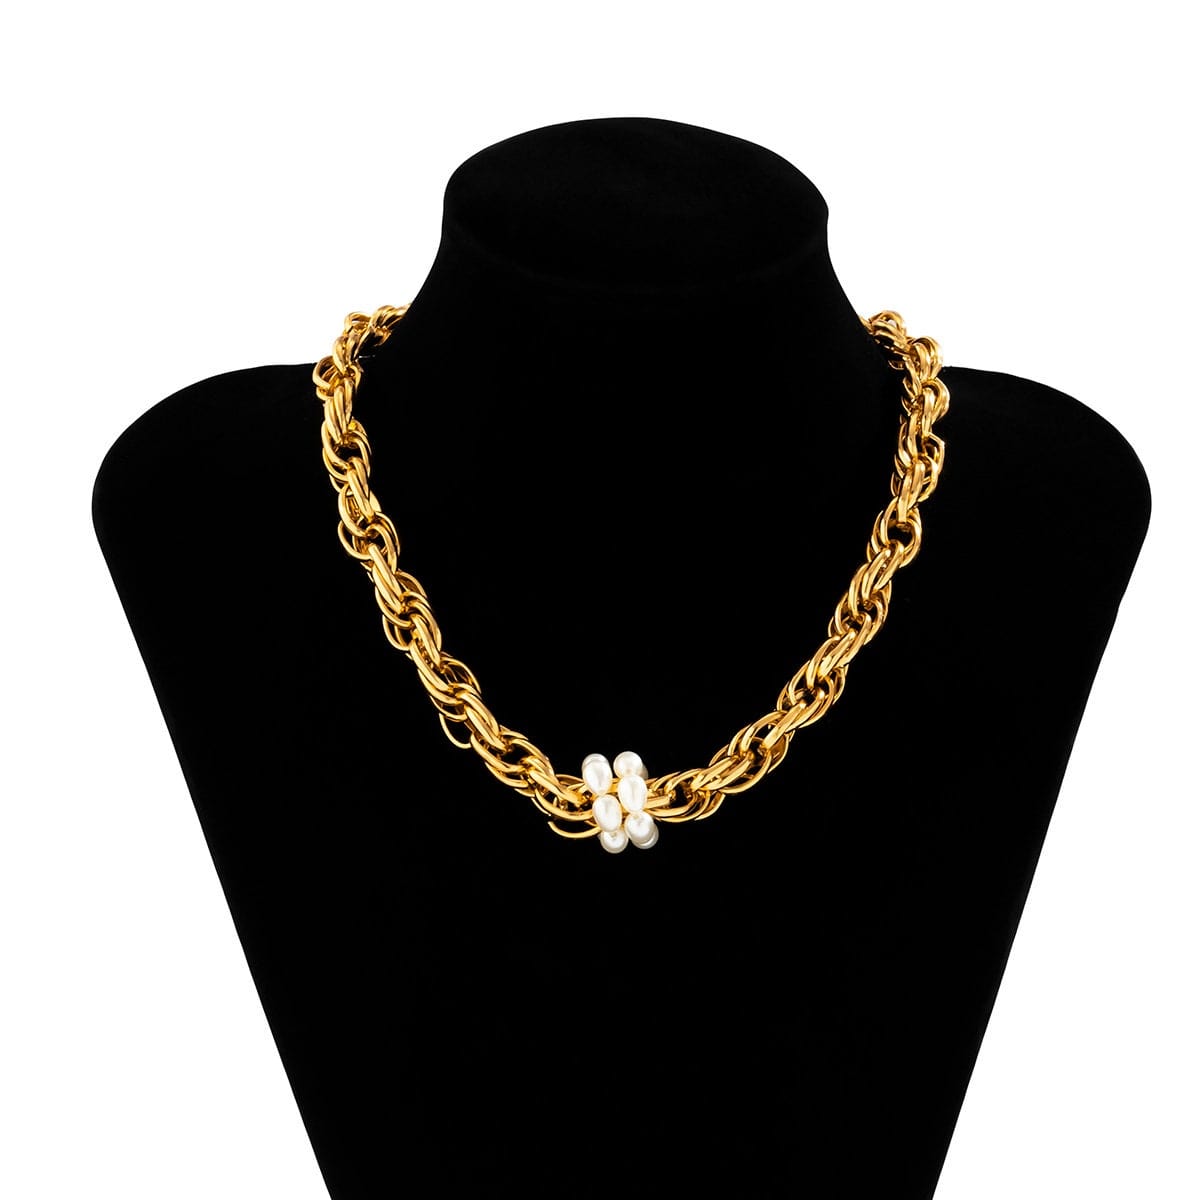 Boho Gold Silver Tone Pearl Charm Rope Chain Choker Necklace